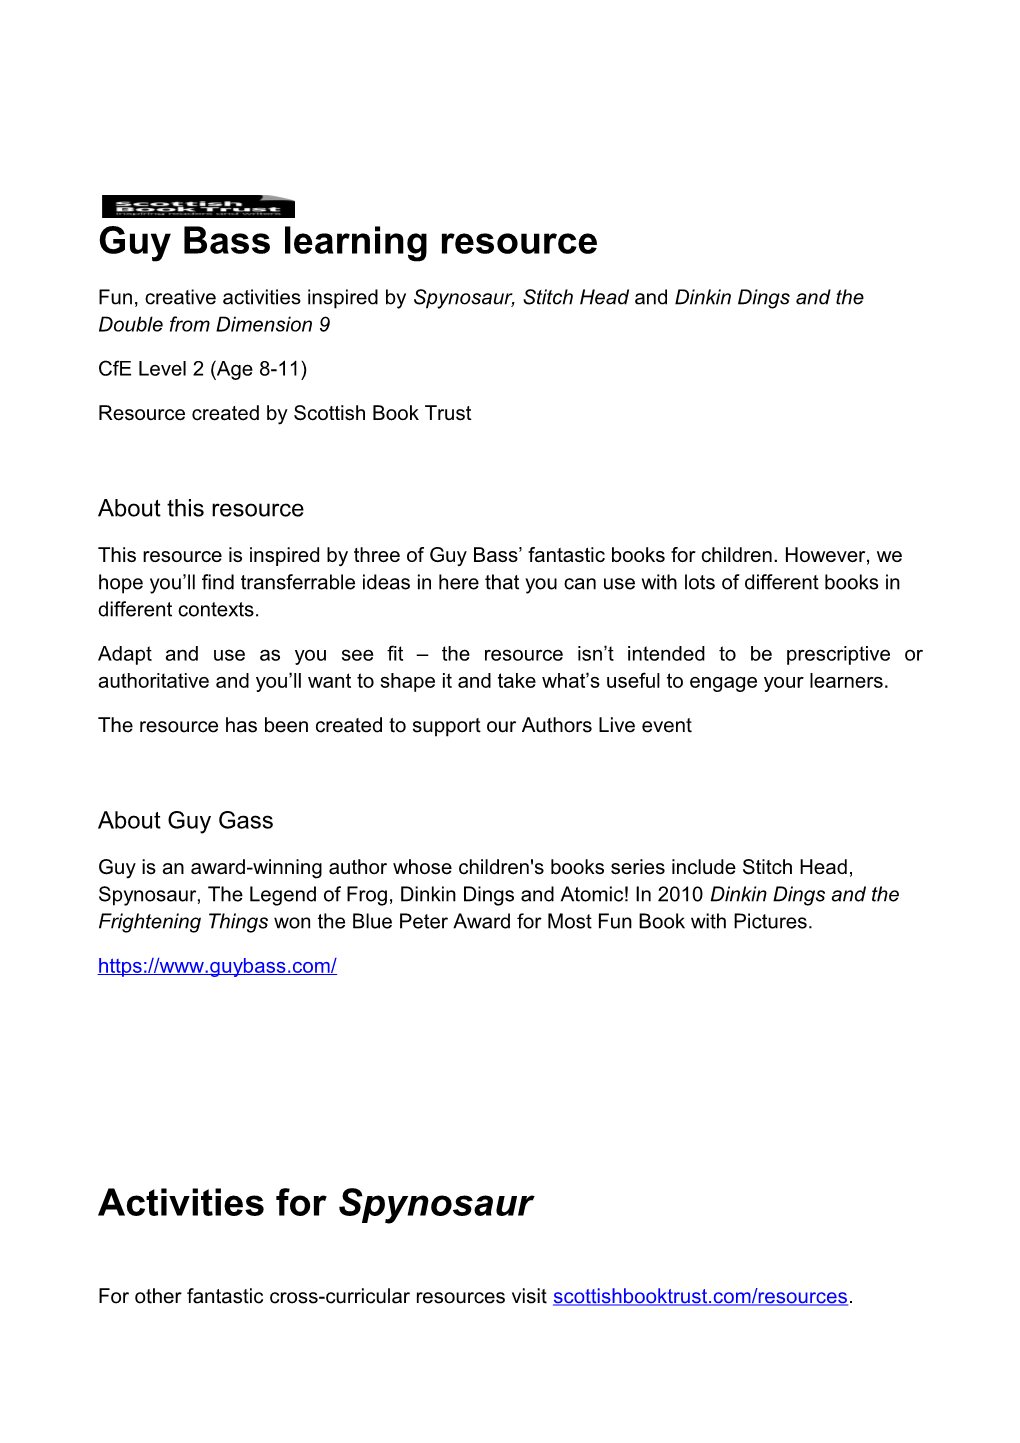 Guy Bass Learning Resource